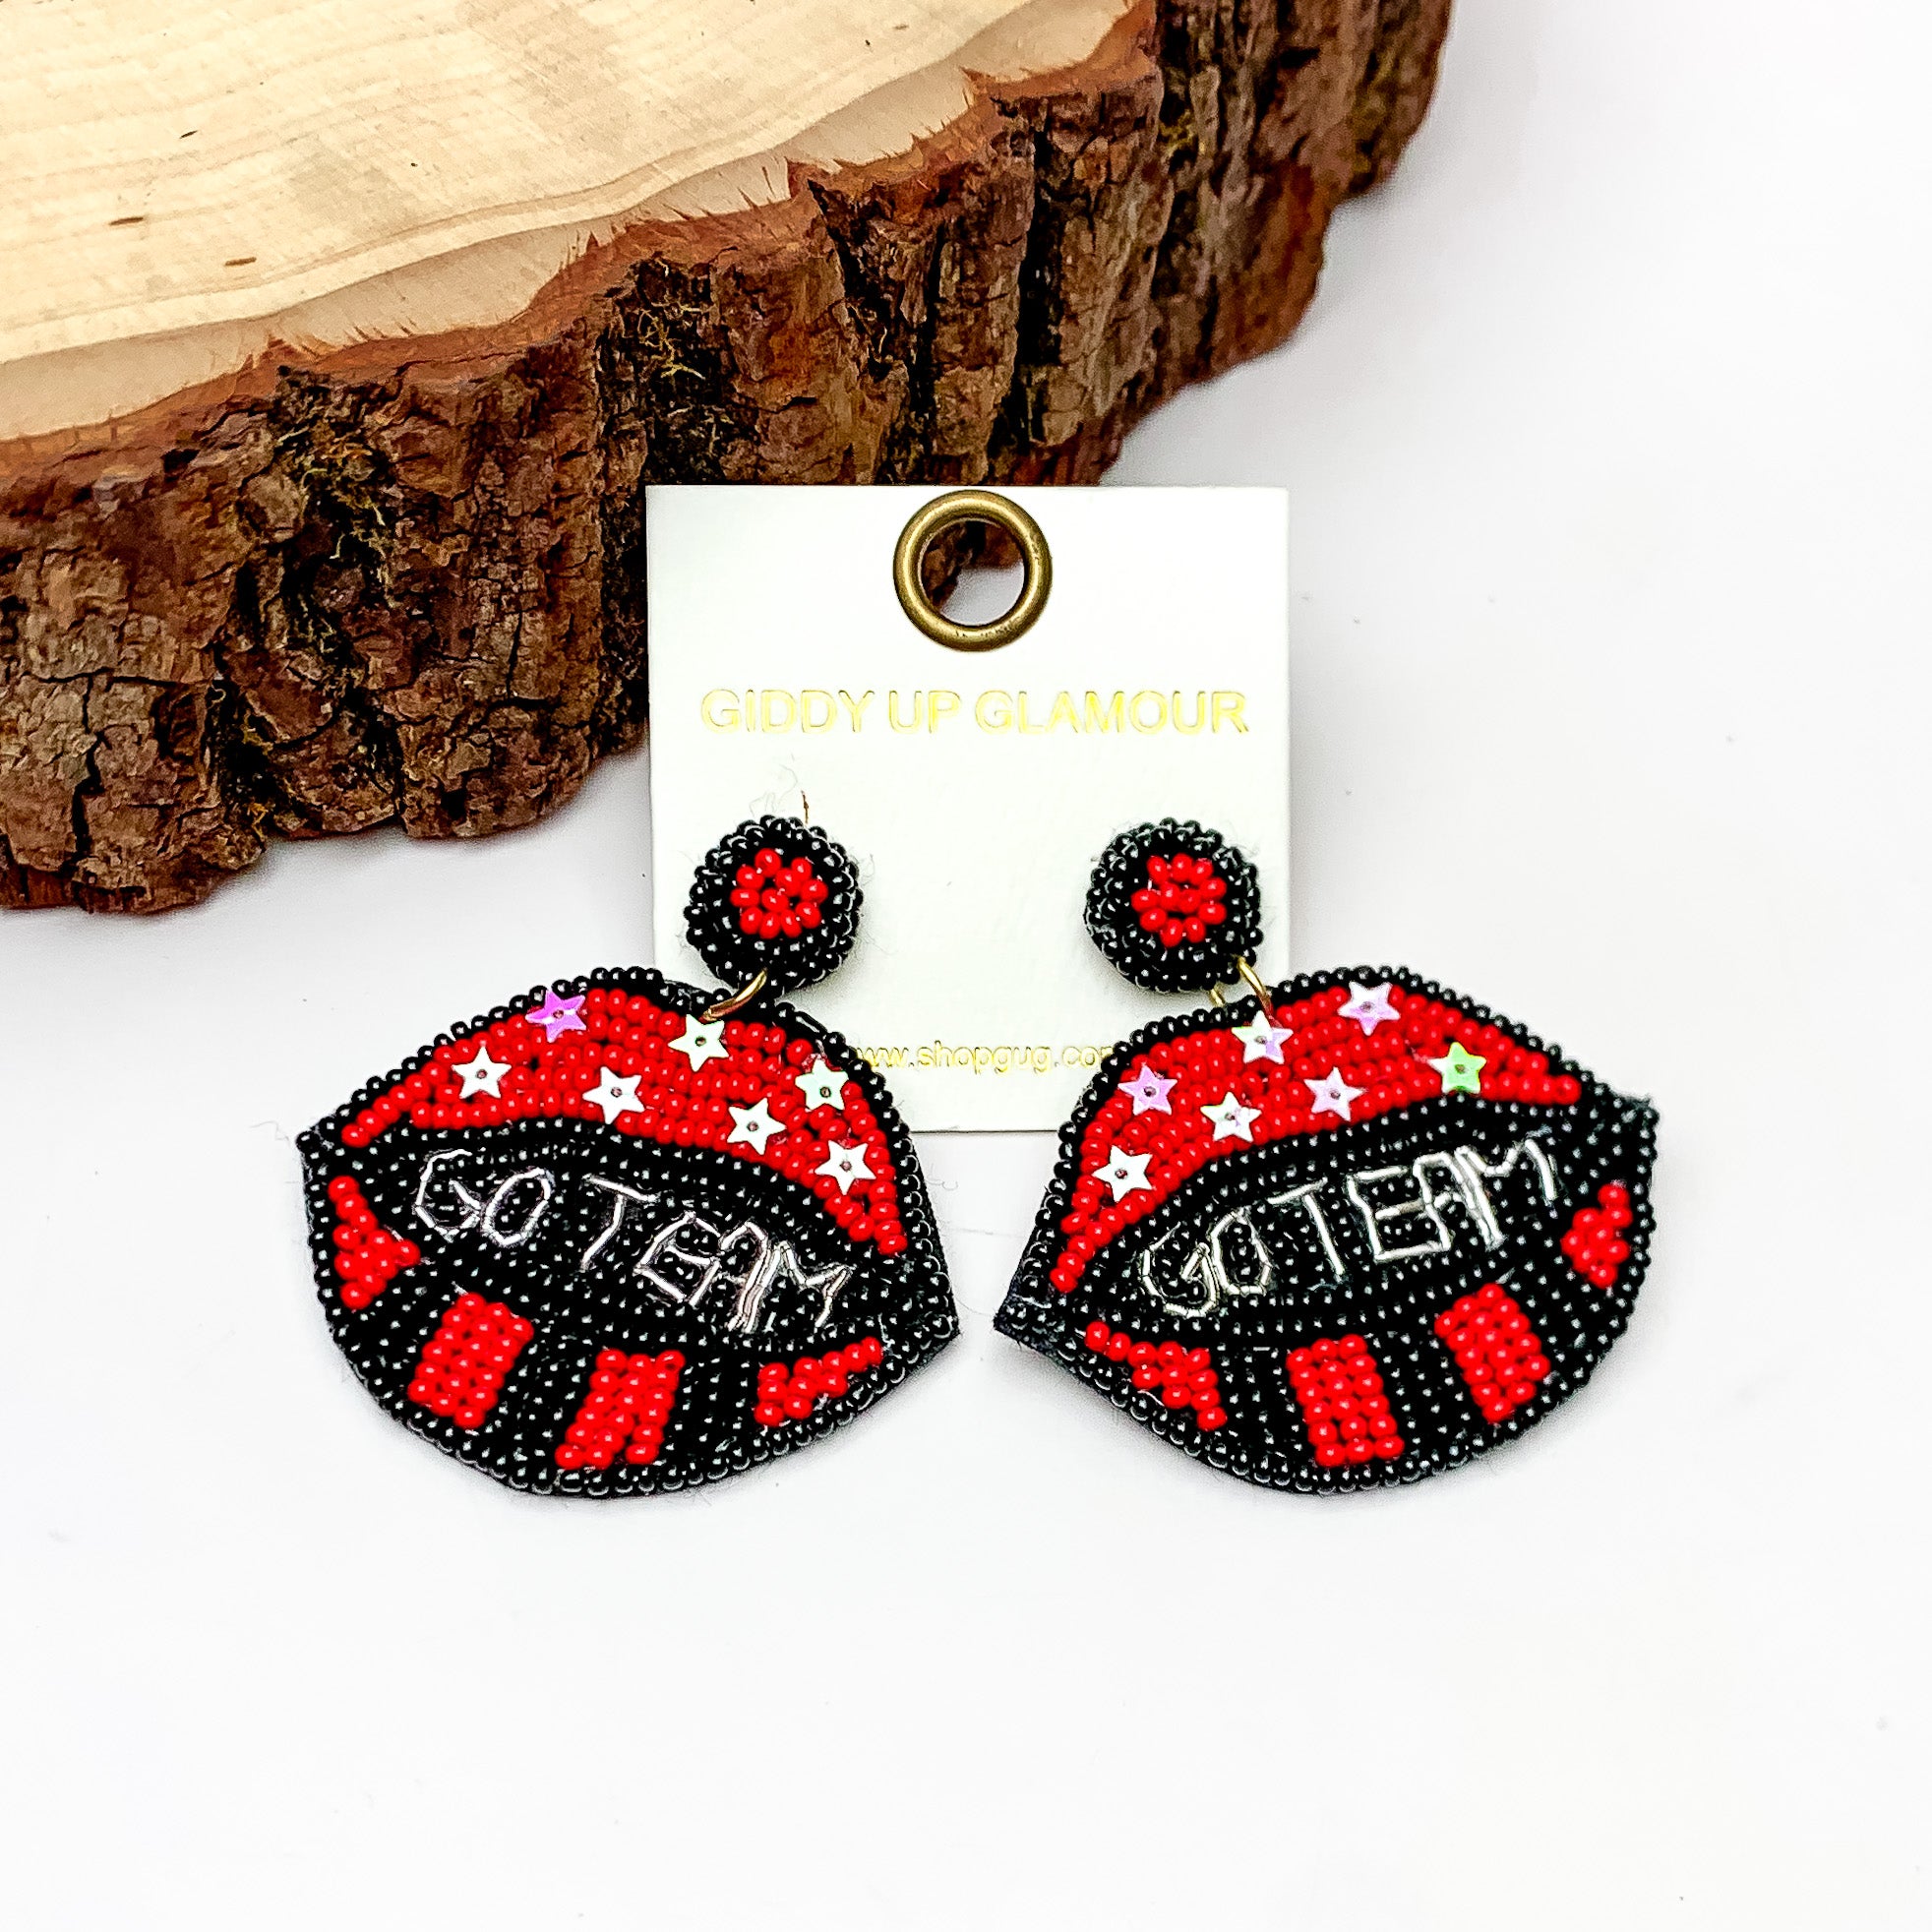 GO TEAM Beaded Lips Post Earrings in Red and Black - Giddy Up Glamour Boutique